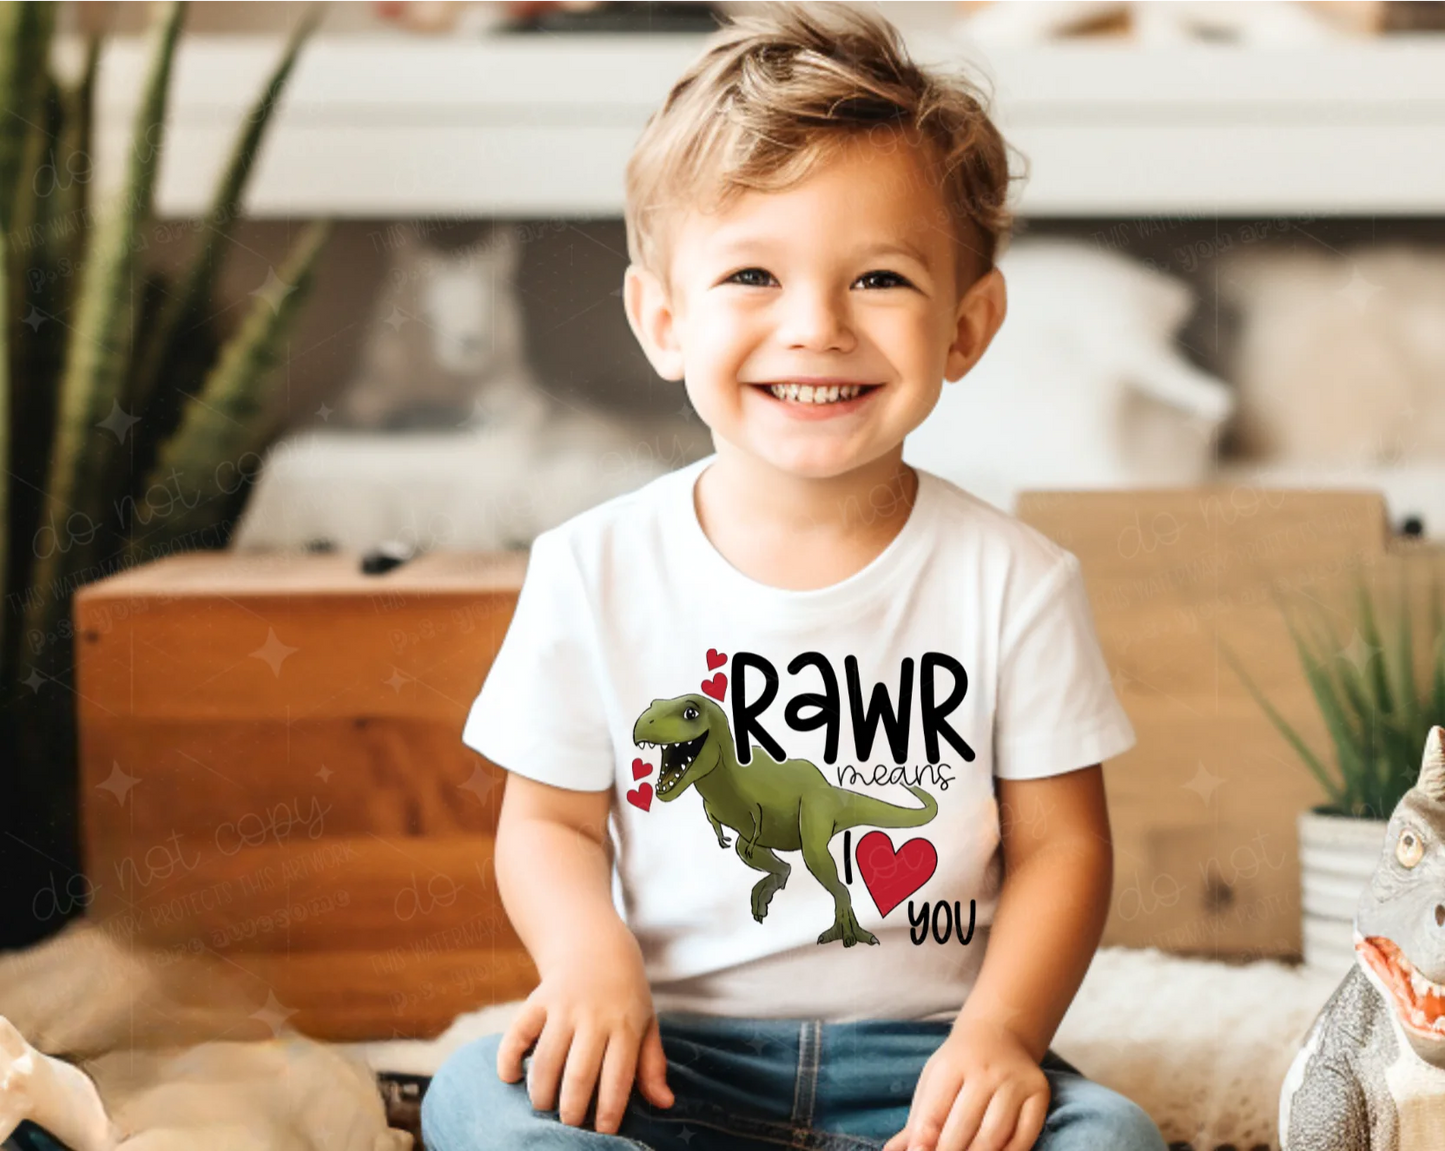 Rawr Means I love you Tee